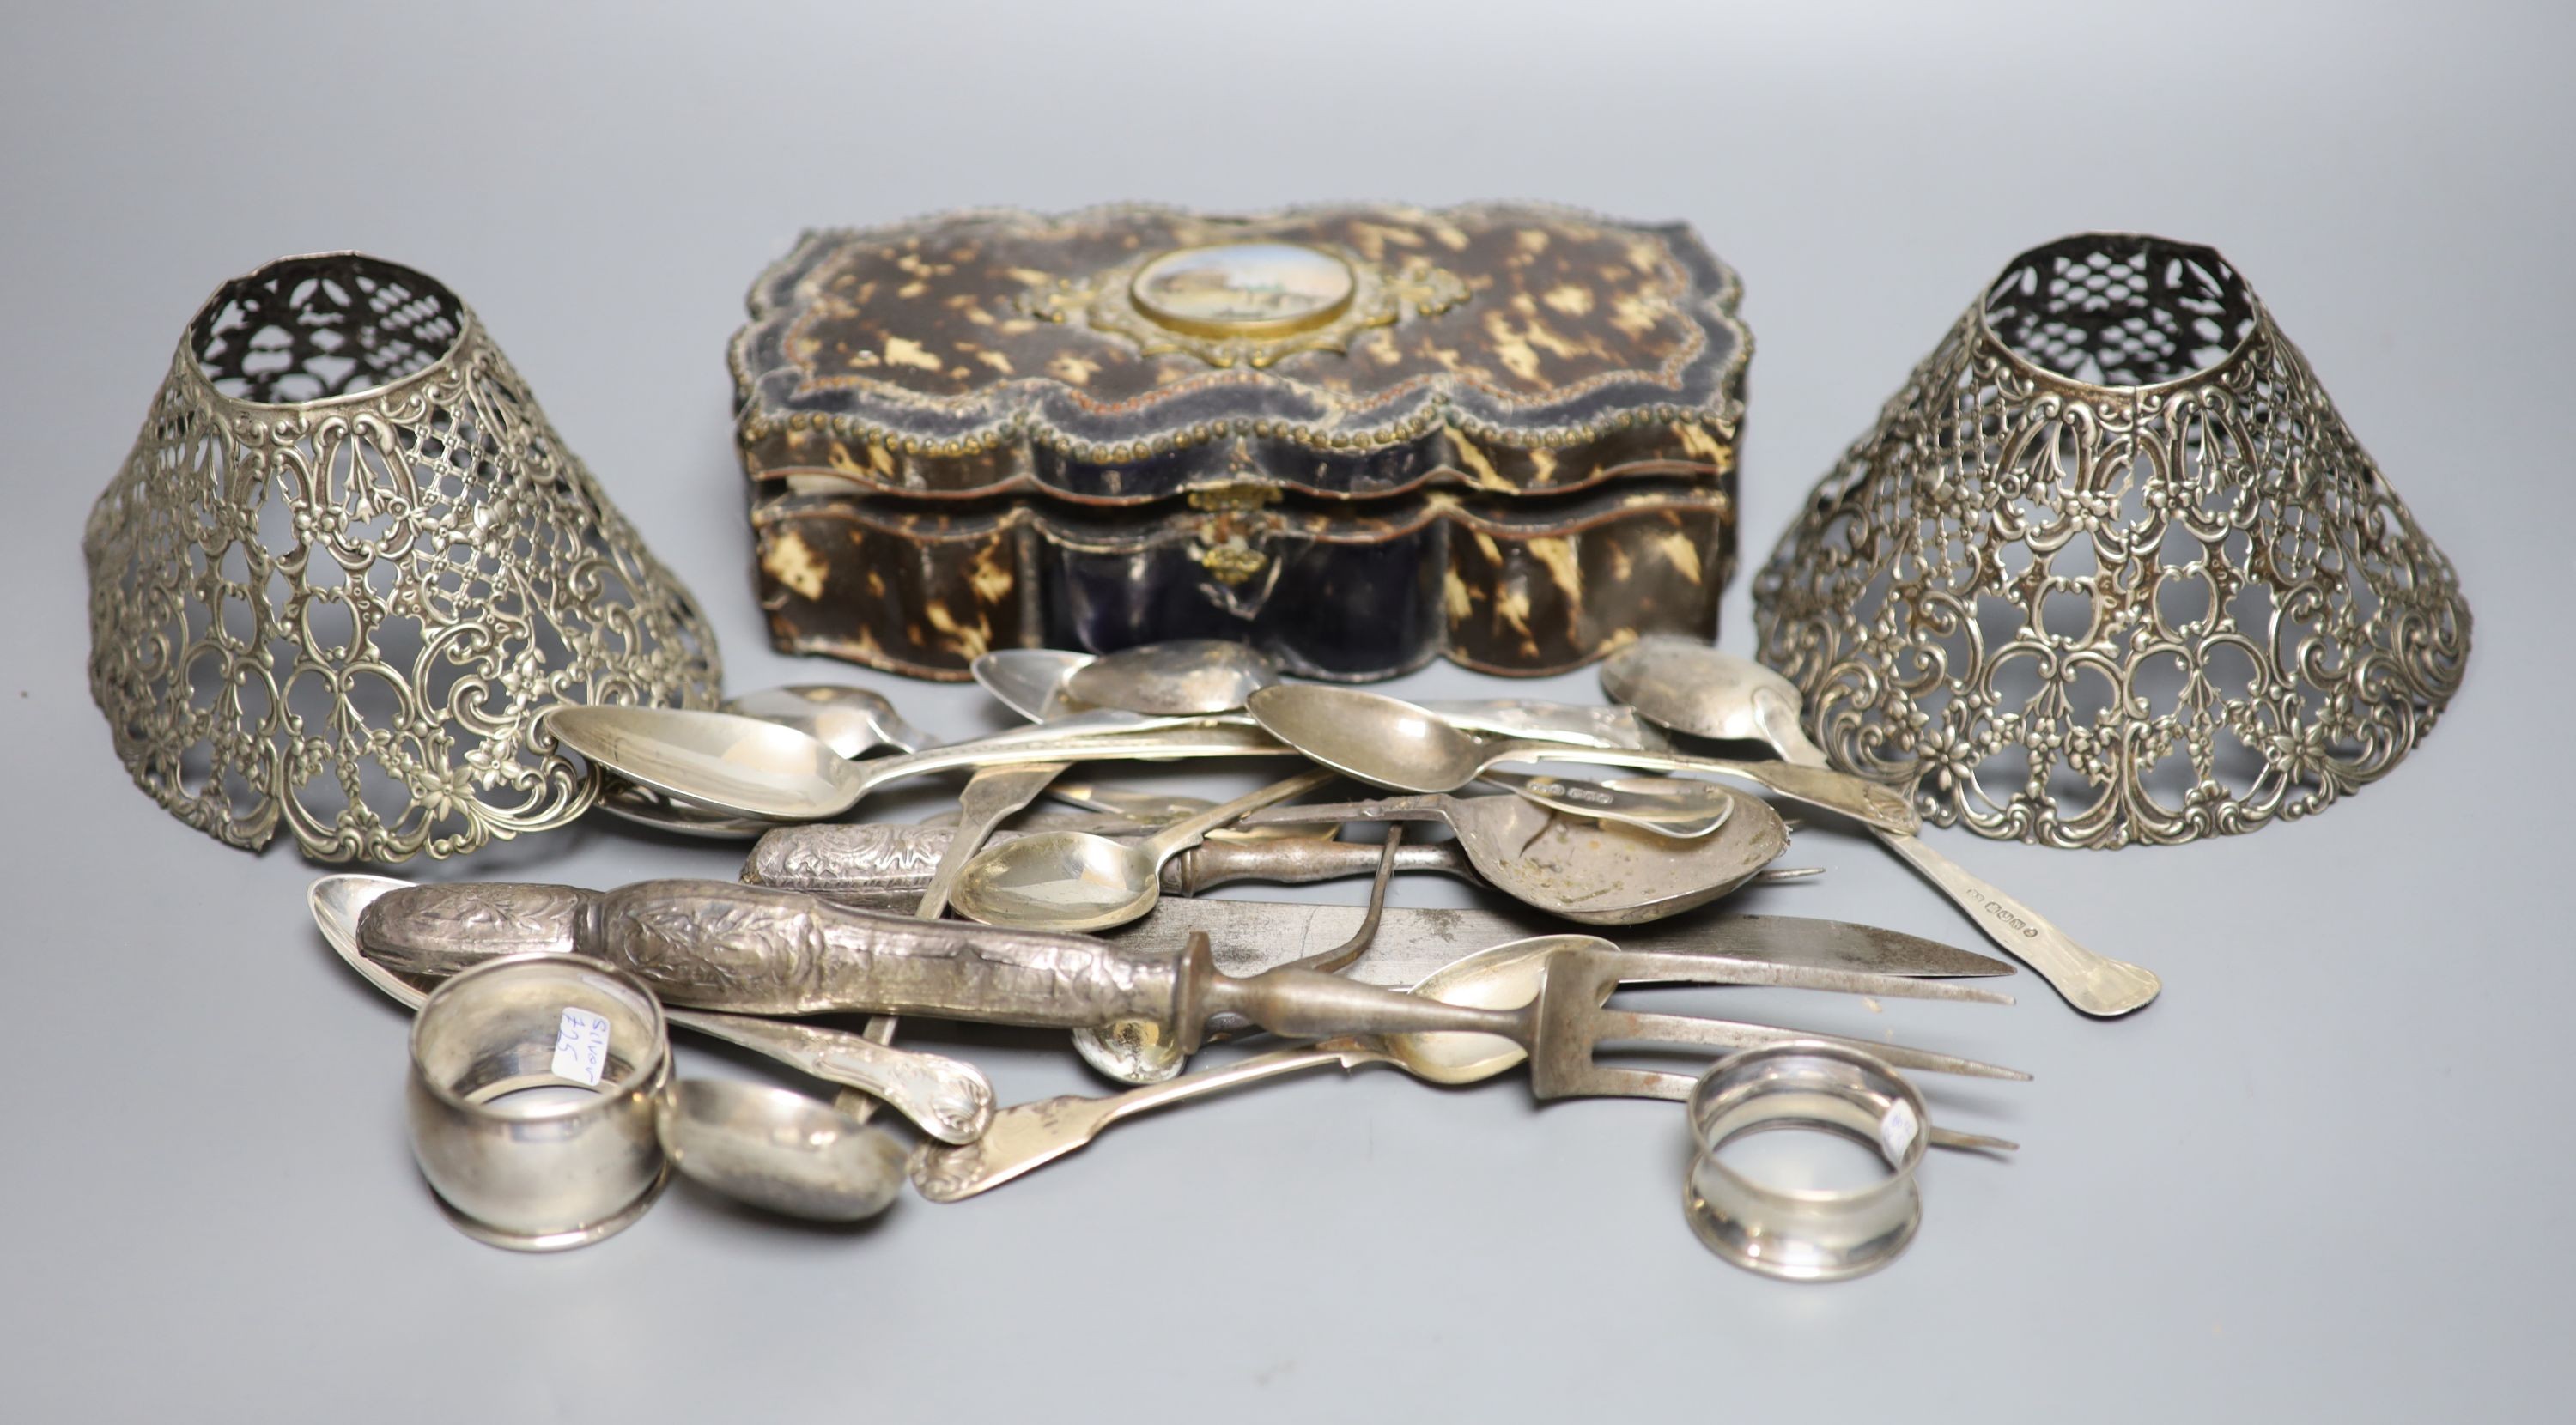 A group of assorted silver flatware and other items, including teaspoons, napkin ring, pierced Gorham lamp shades, carving implements and a Palais Royale faux tortoiseshell casket